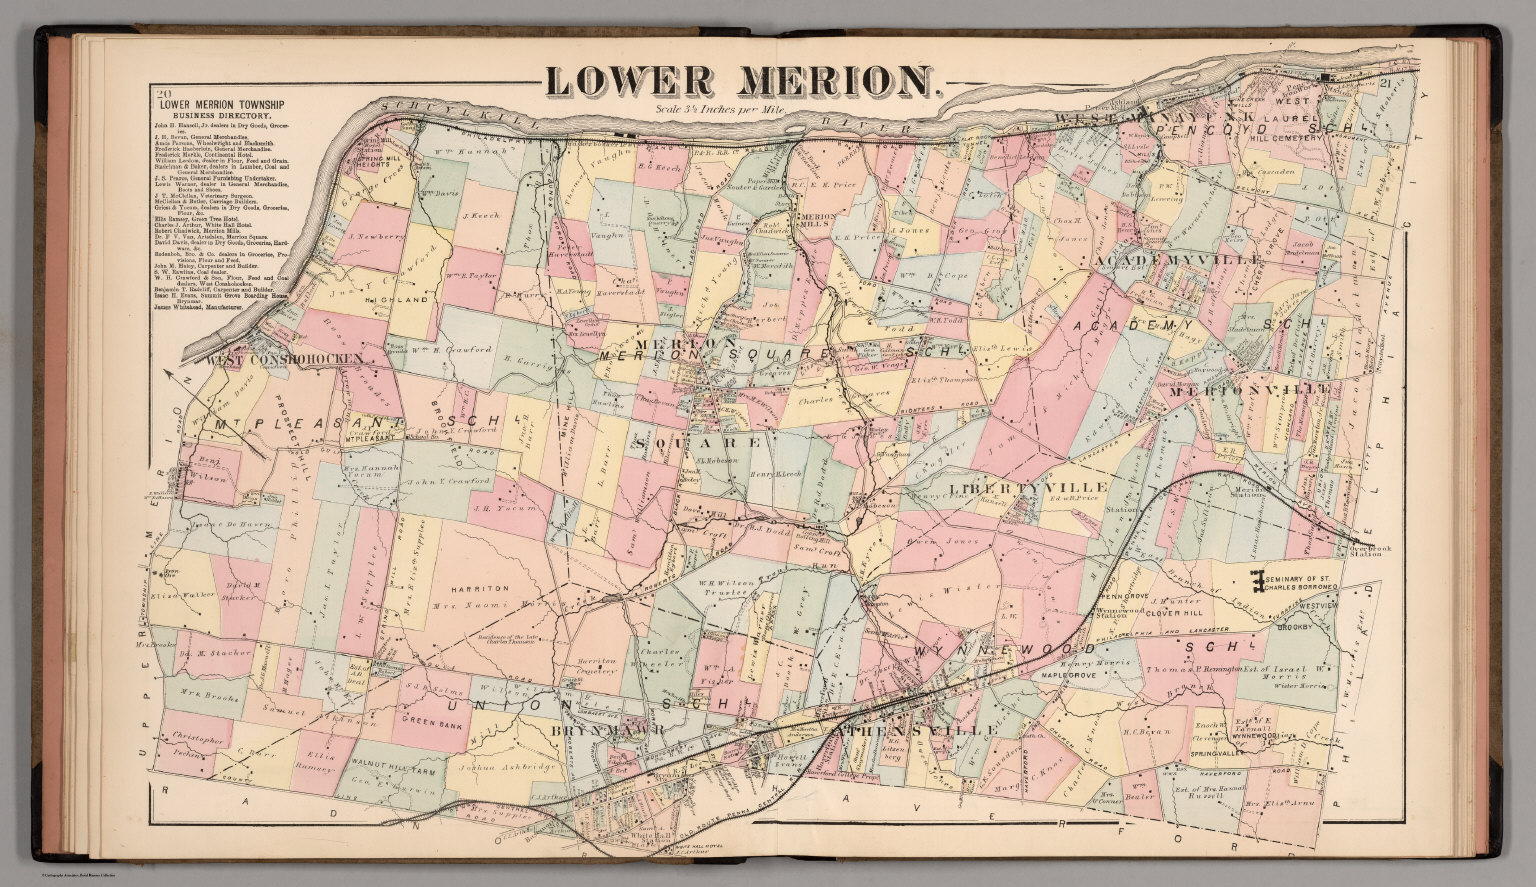 zoning code lower merion township